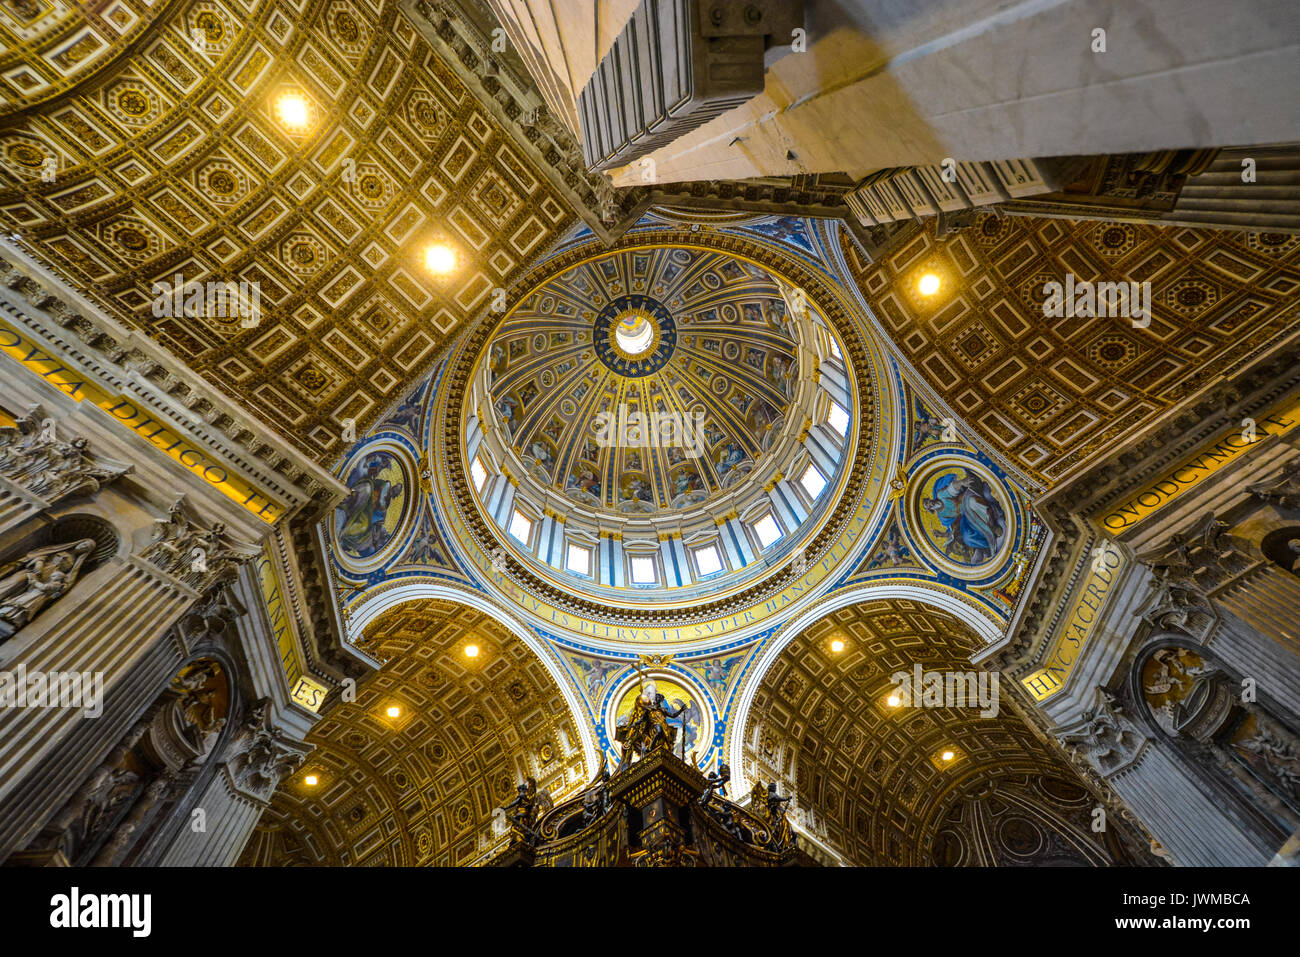 The Cupola of St Peters Basilica in Vatican City, Rome Italy from the interior showing brilliant gold and blue colors Stock Photo